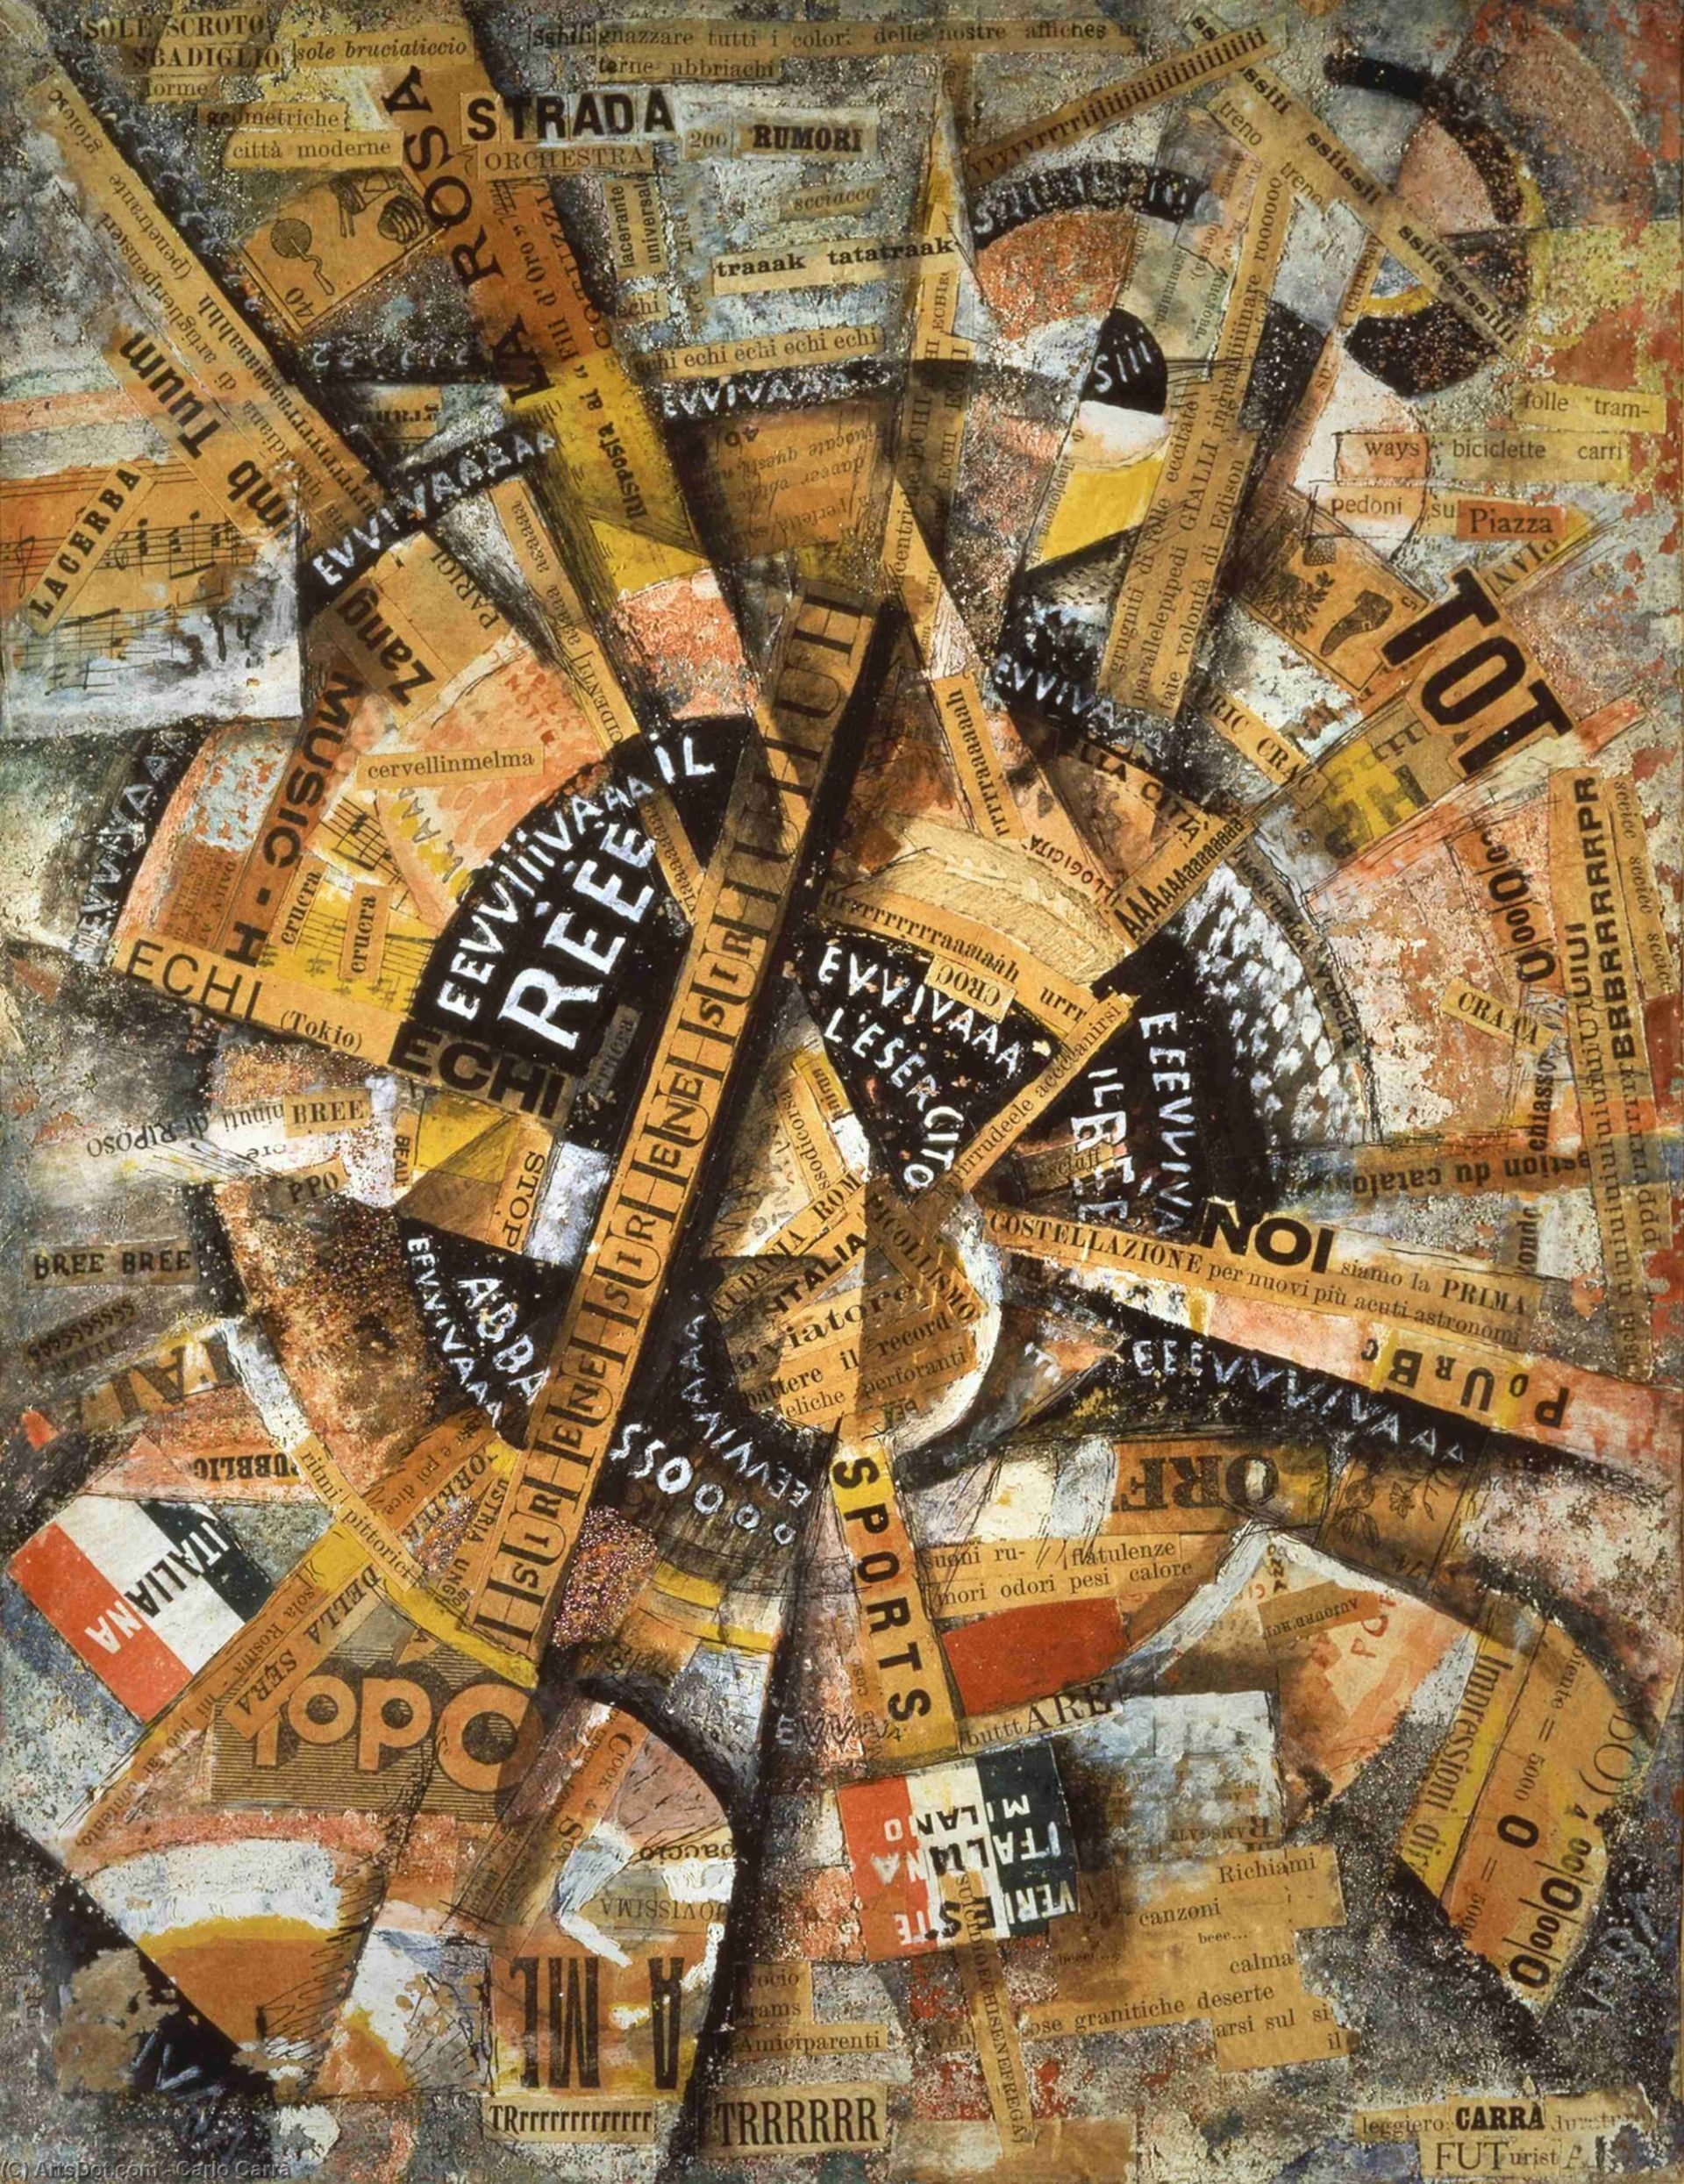 An artwork titled 'Interventionist Demonstration (Patriotic Holiday – Free Word Painting)' by Carlo Carrà from 1914 showcases the dynamism of Futurism. The central composition resembles an airplane propeller. Radiating outwards are myriad pasted and painted words, reminiscent of a cacophony of voices in a crowd. The collage includes snippets from ads, Futurist poems, and news articles, interspersed with two vibrant Italian flags and hand-inscribed slogans that praise the Italian military and monarchy while denouncing Austria.